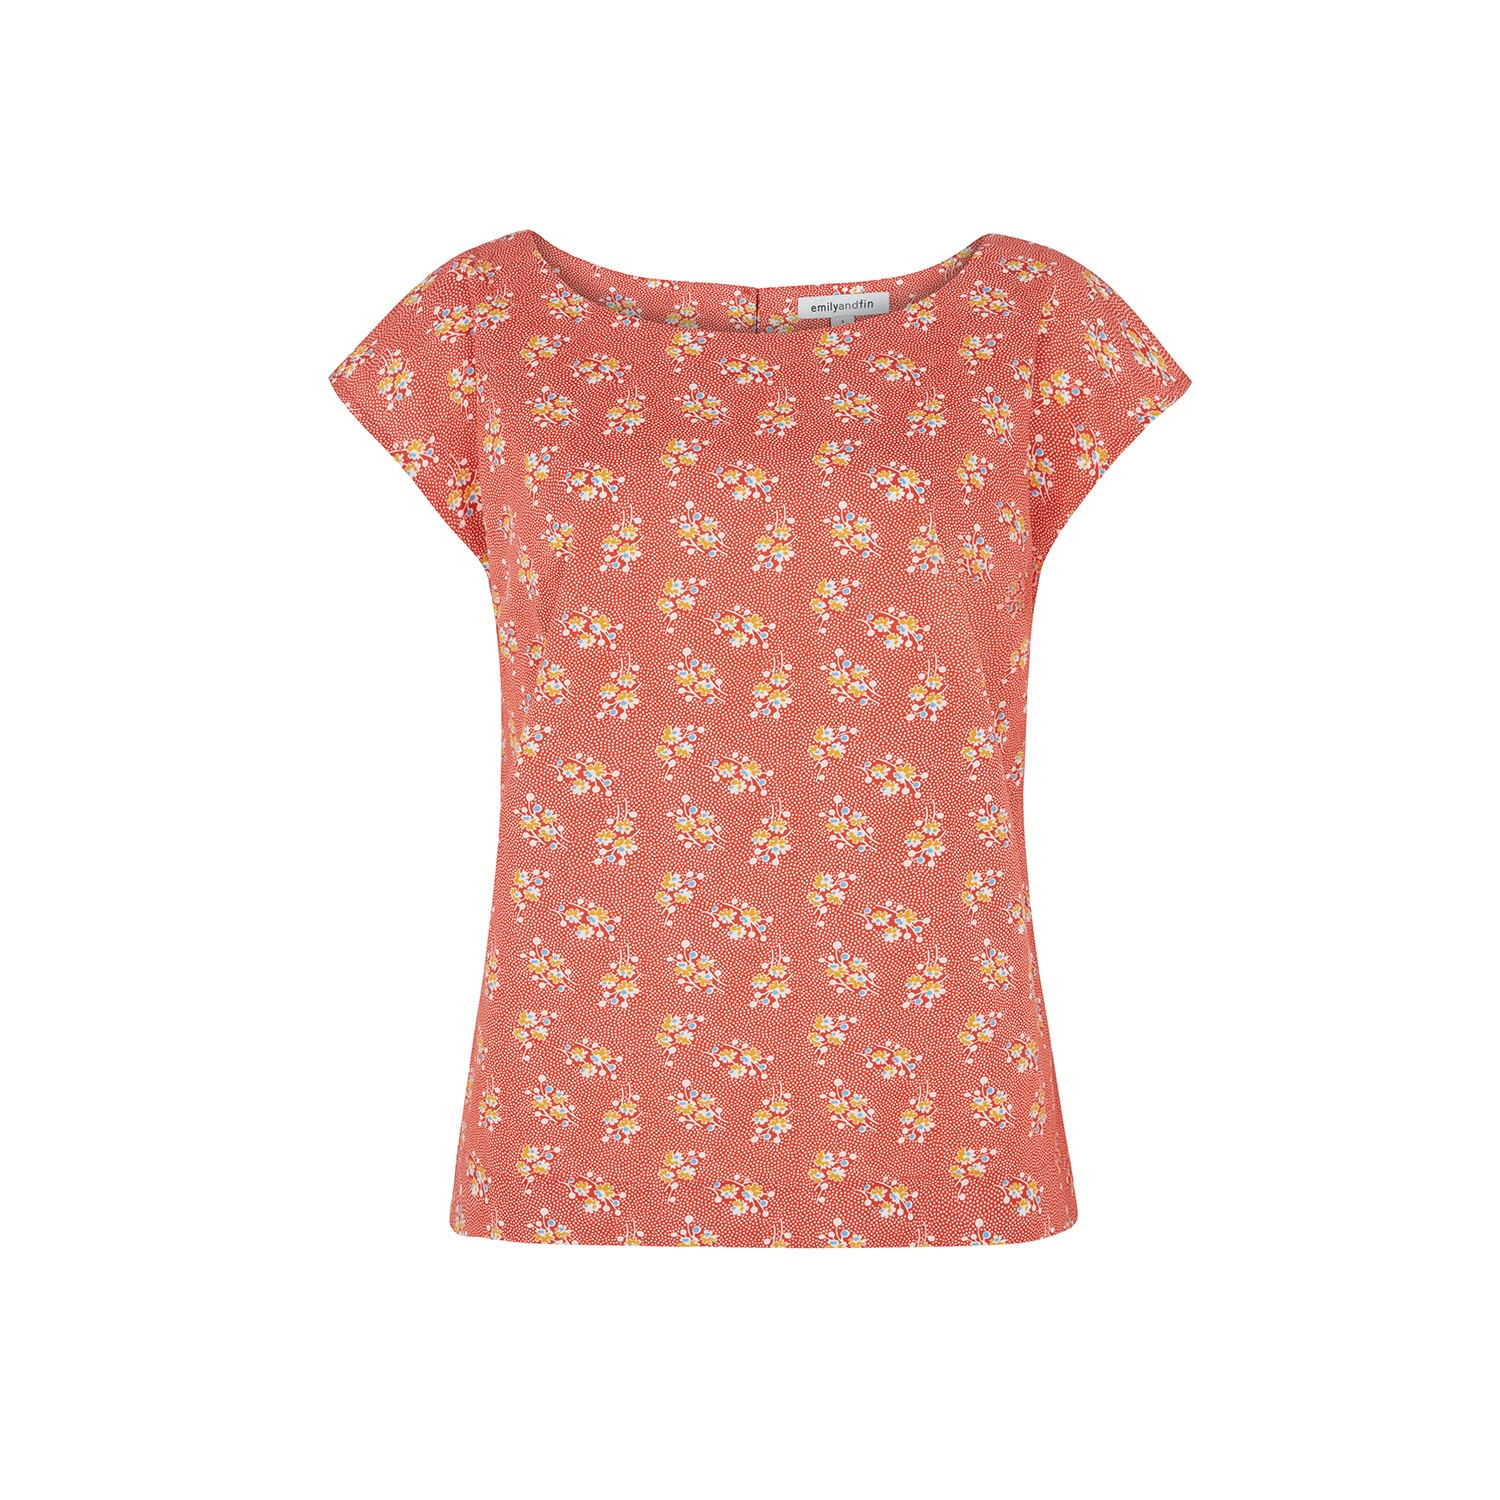 Women’s Yellow / Orange / Red Edna Paprika Ditsy Floral Top Small Emily and Fin